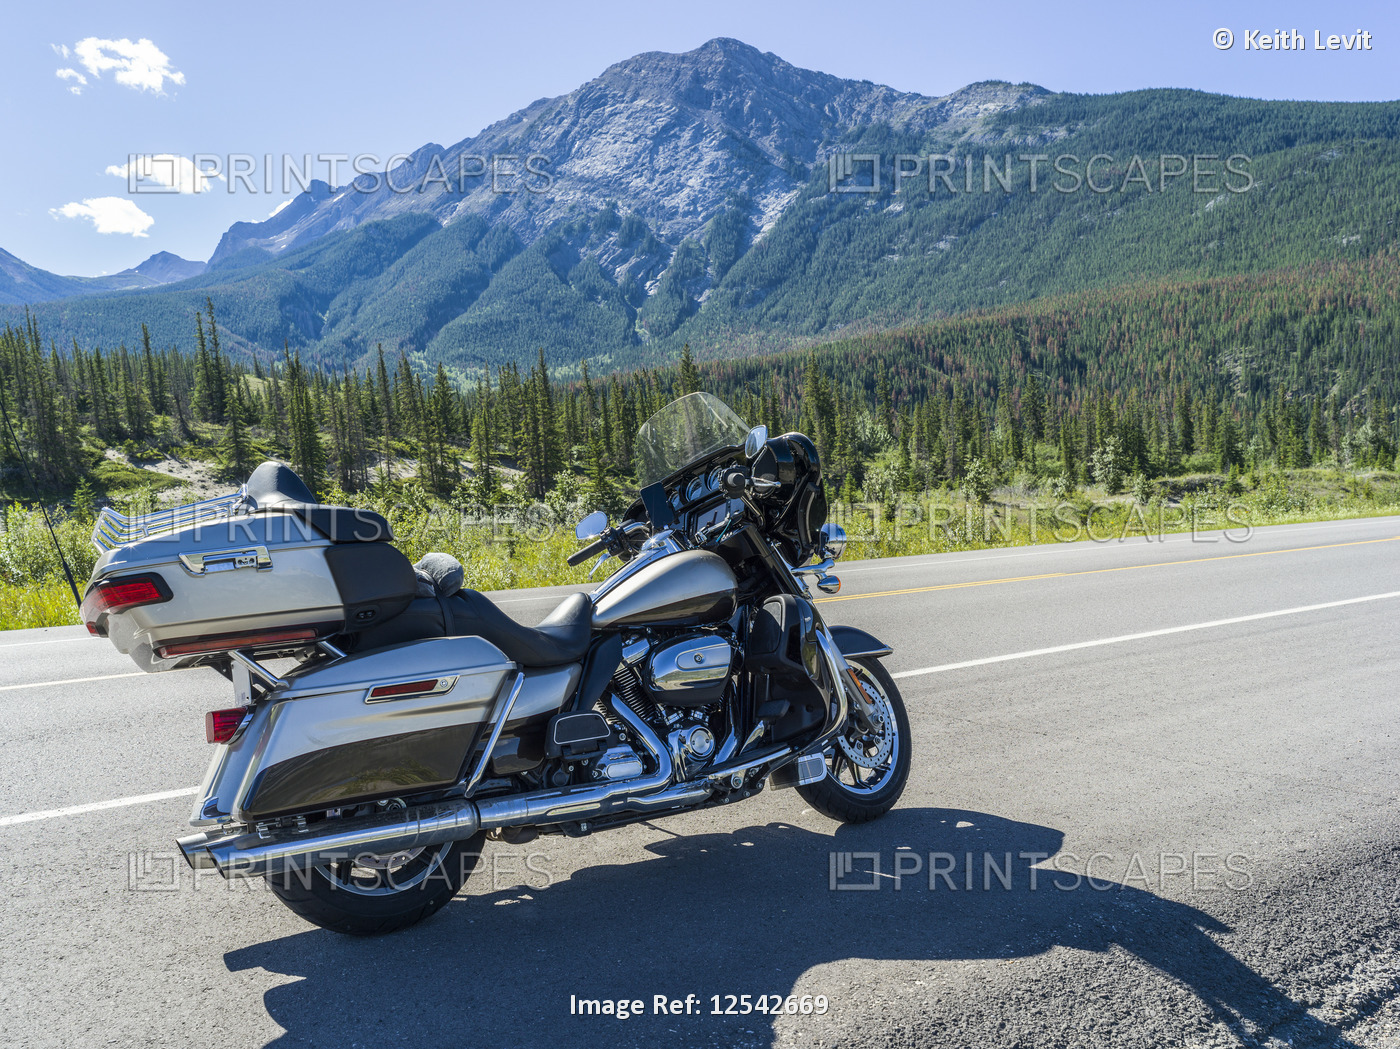 A motorcycle parked on the side of the road with view of the Rocky Mountains, ...